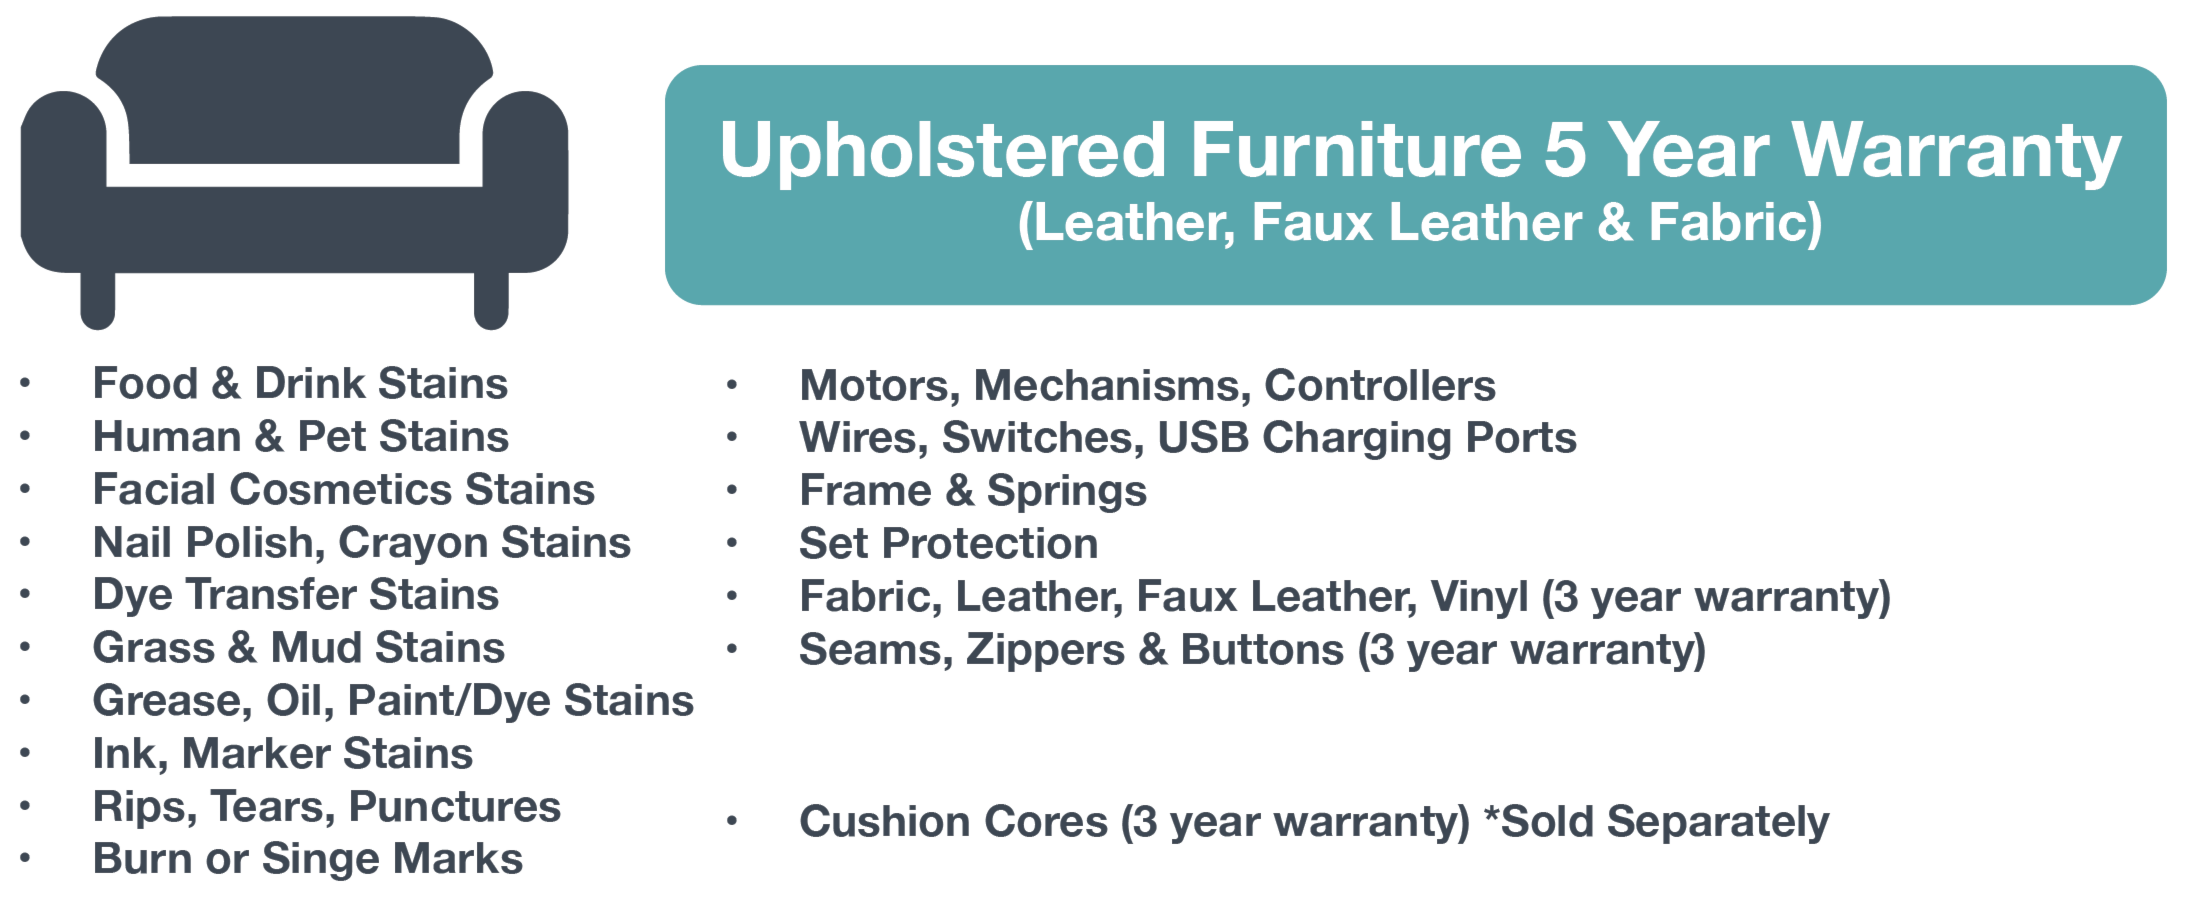 Upholstered Furniture and Wood & Solid Surface Furniture - Premium Plan with Plus+ Protection